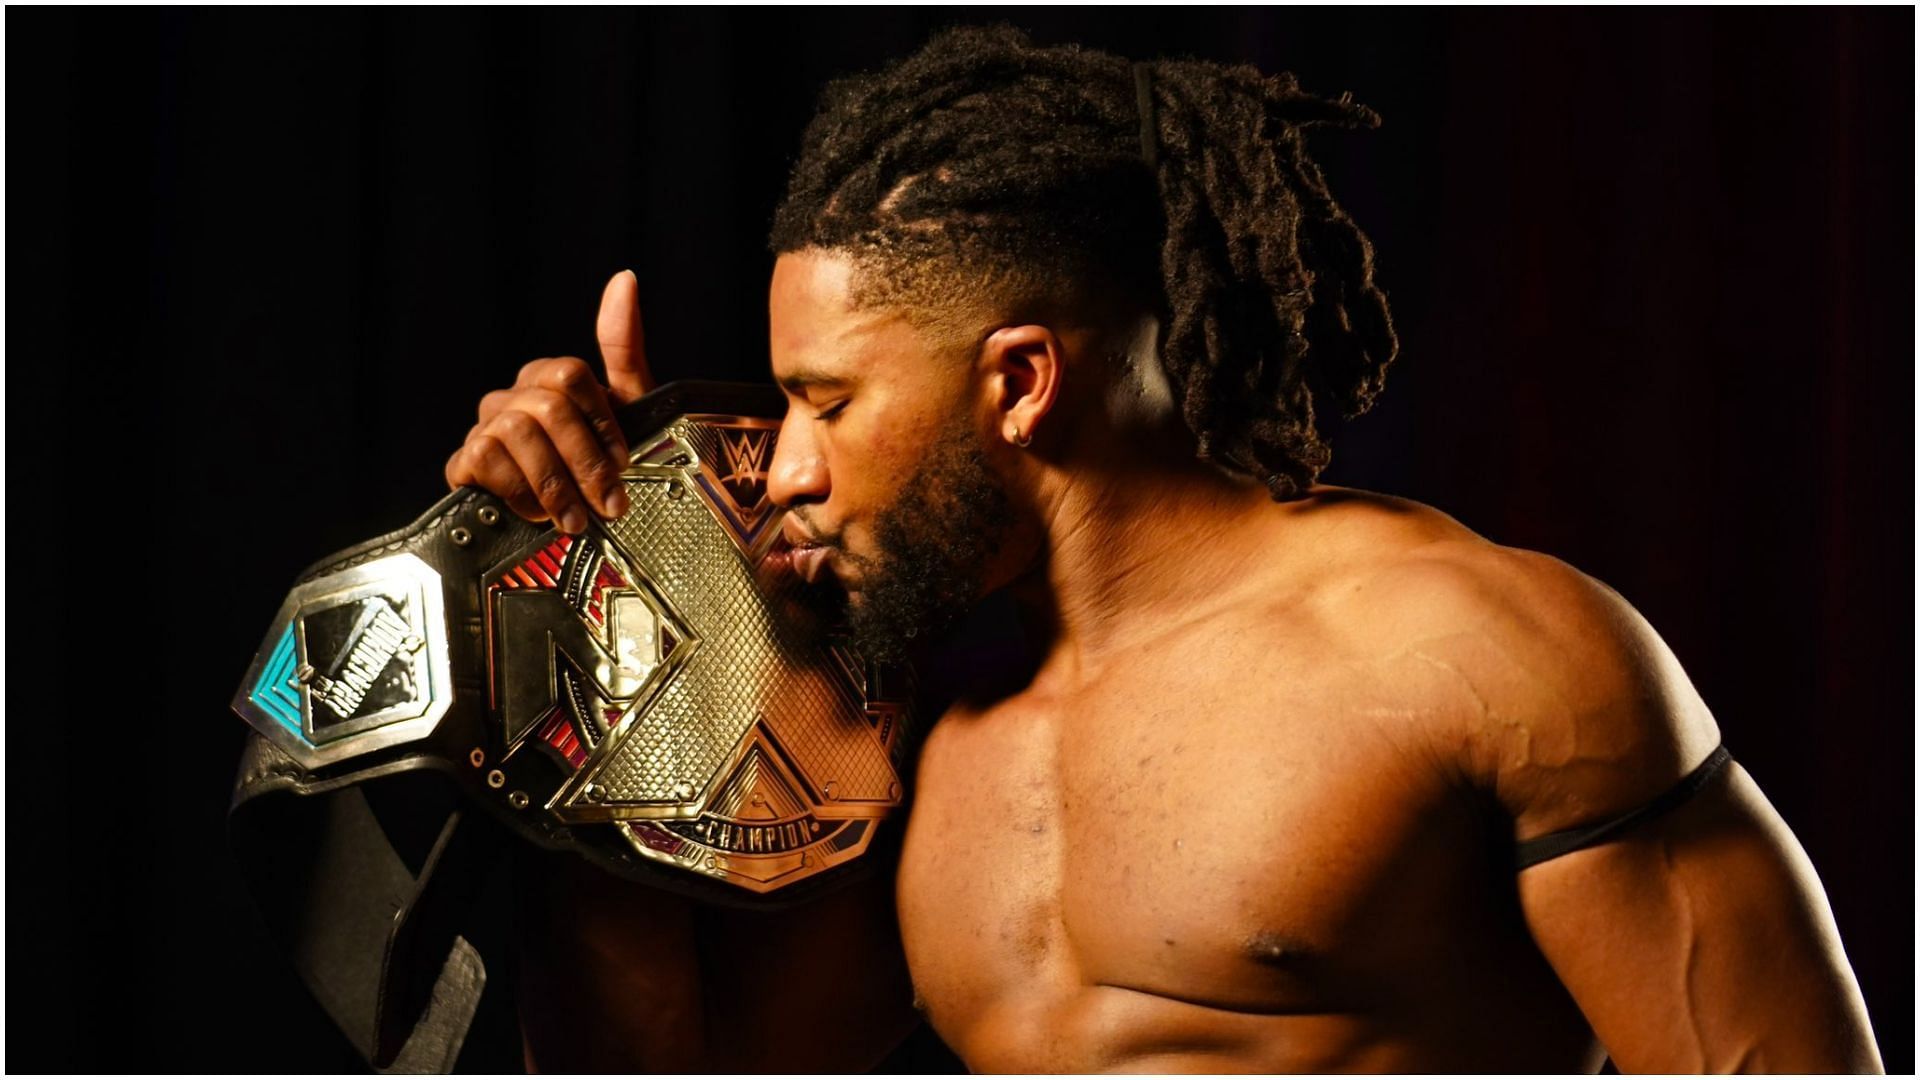 Trick Williams is the current WWE NXT Champion.